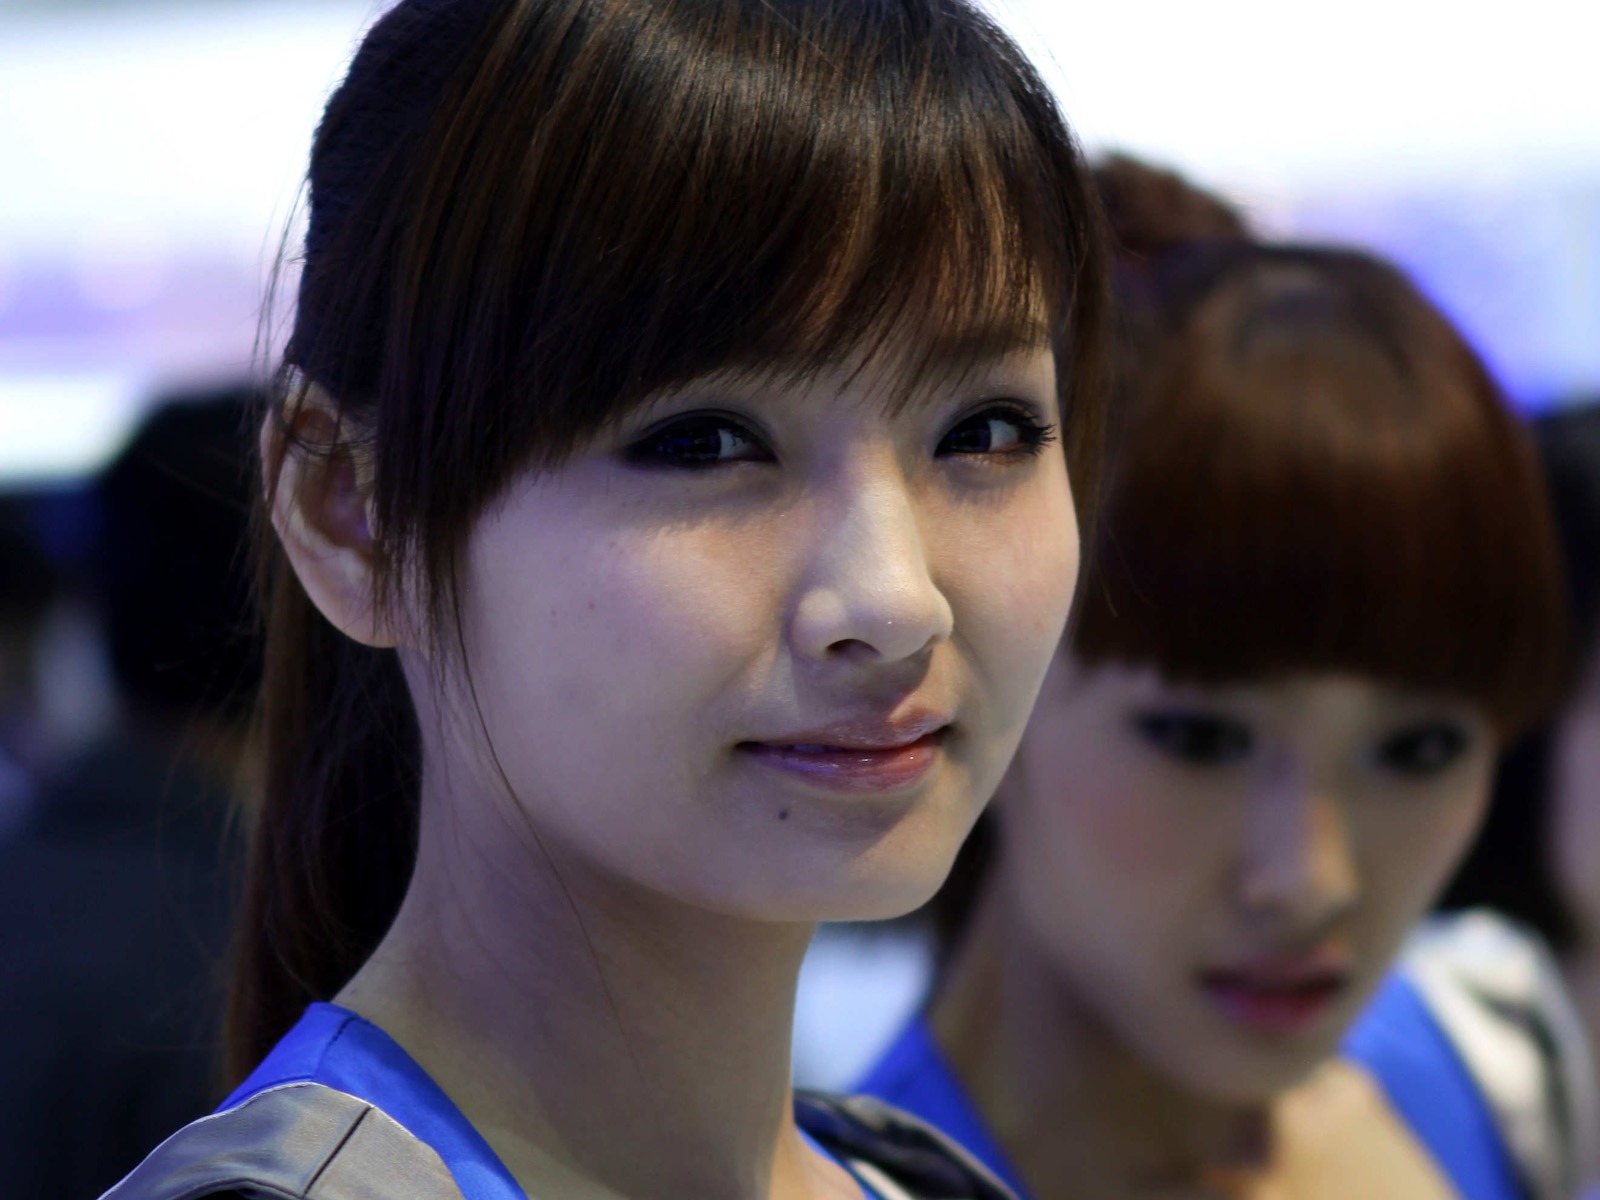 2010 Beijing Auto Show car models Collection (2) #3 - 1600x1200